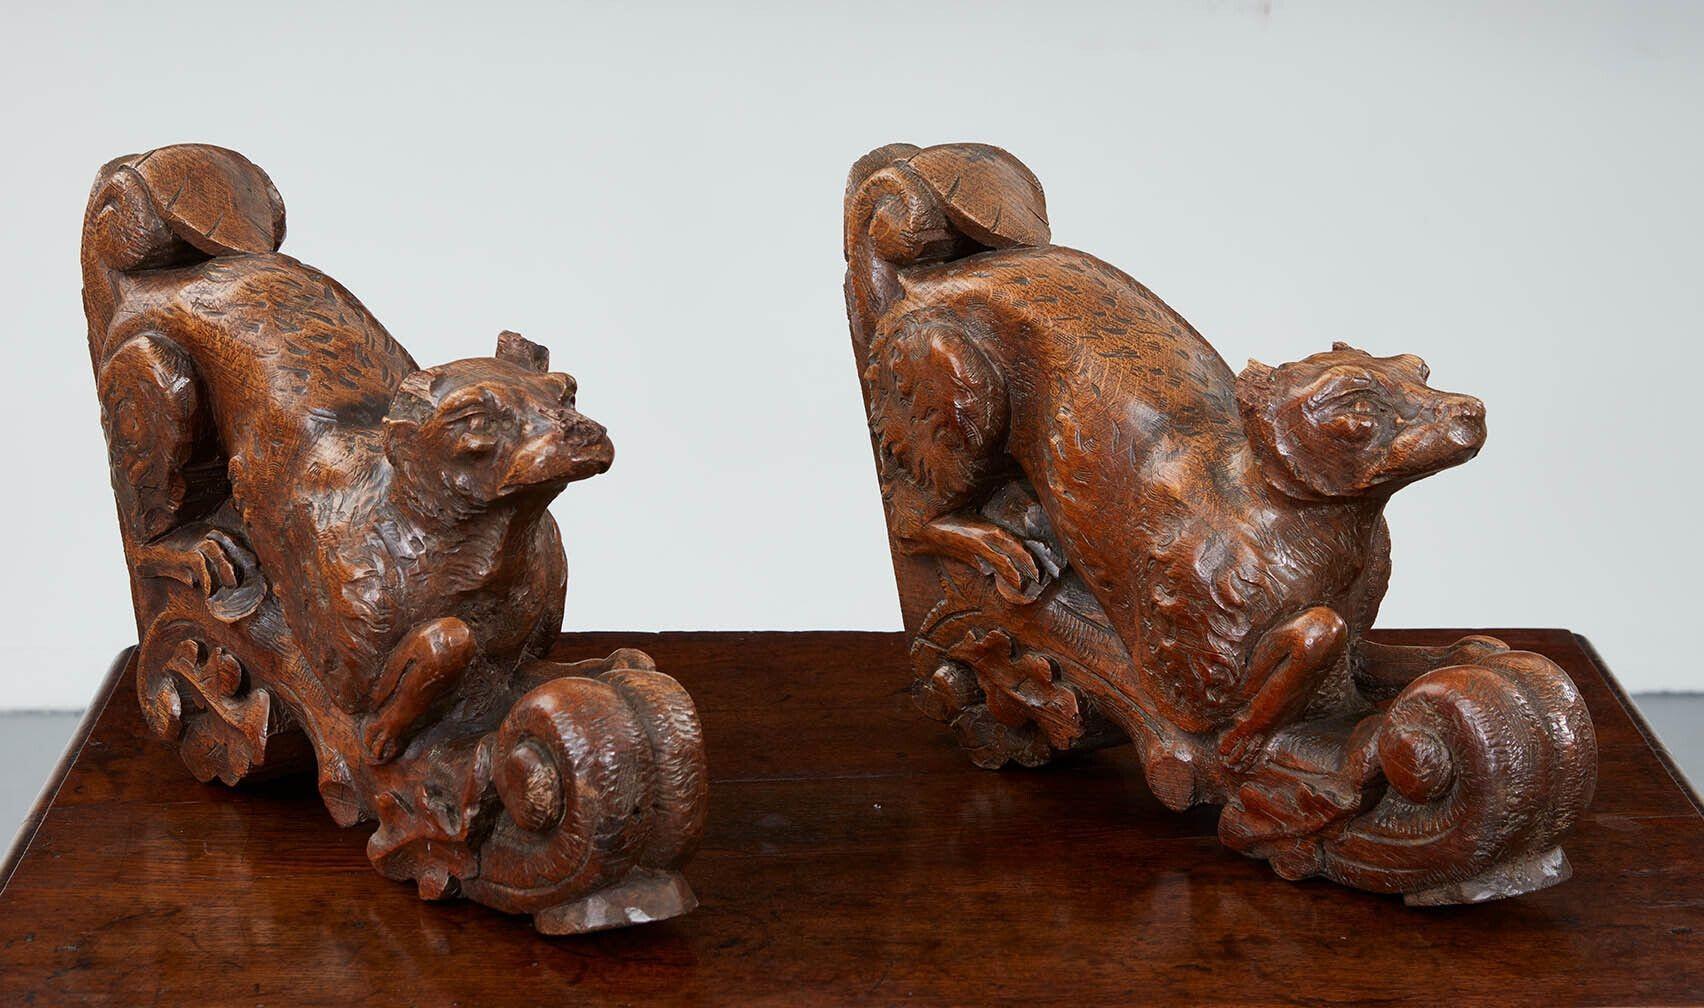 A pair of Arts & Crafts brackets hand-carved in the shape of pouncing foxes on oak branches. Originally bench or table brackets, they have developed marvellously worn and tactile surfaces. Heavy and substantial. Would make a decorative and unique